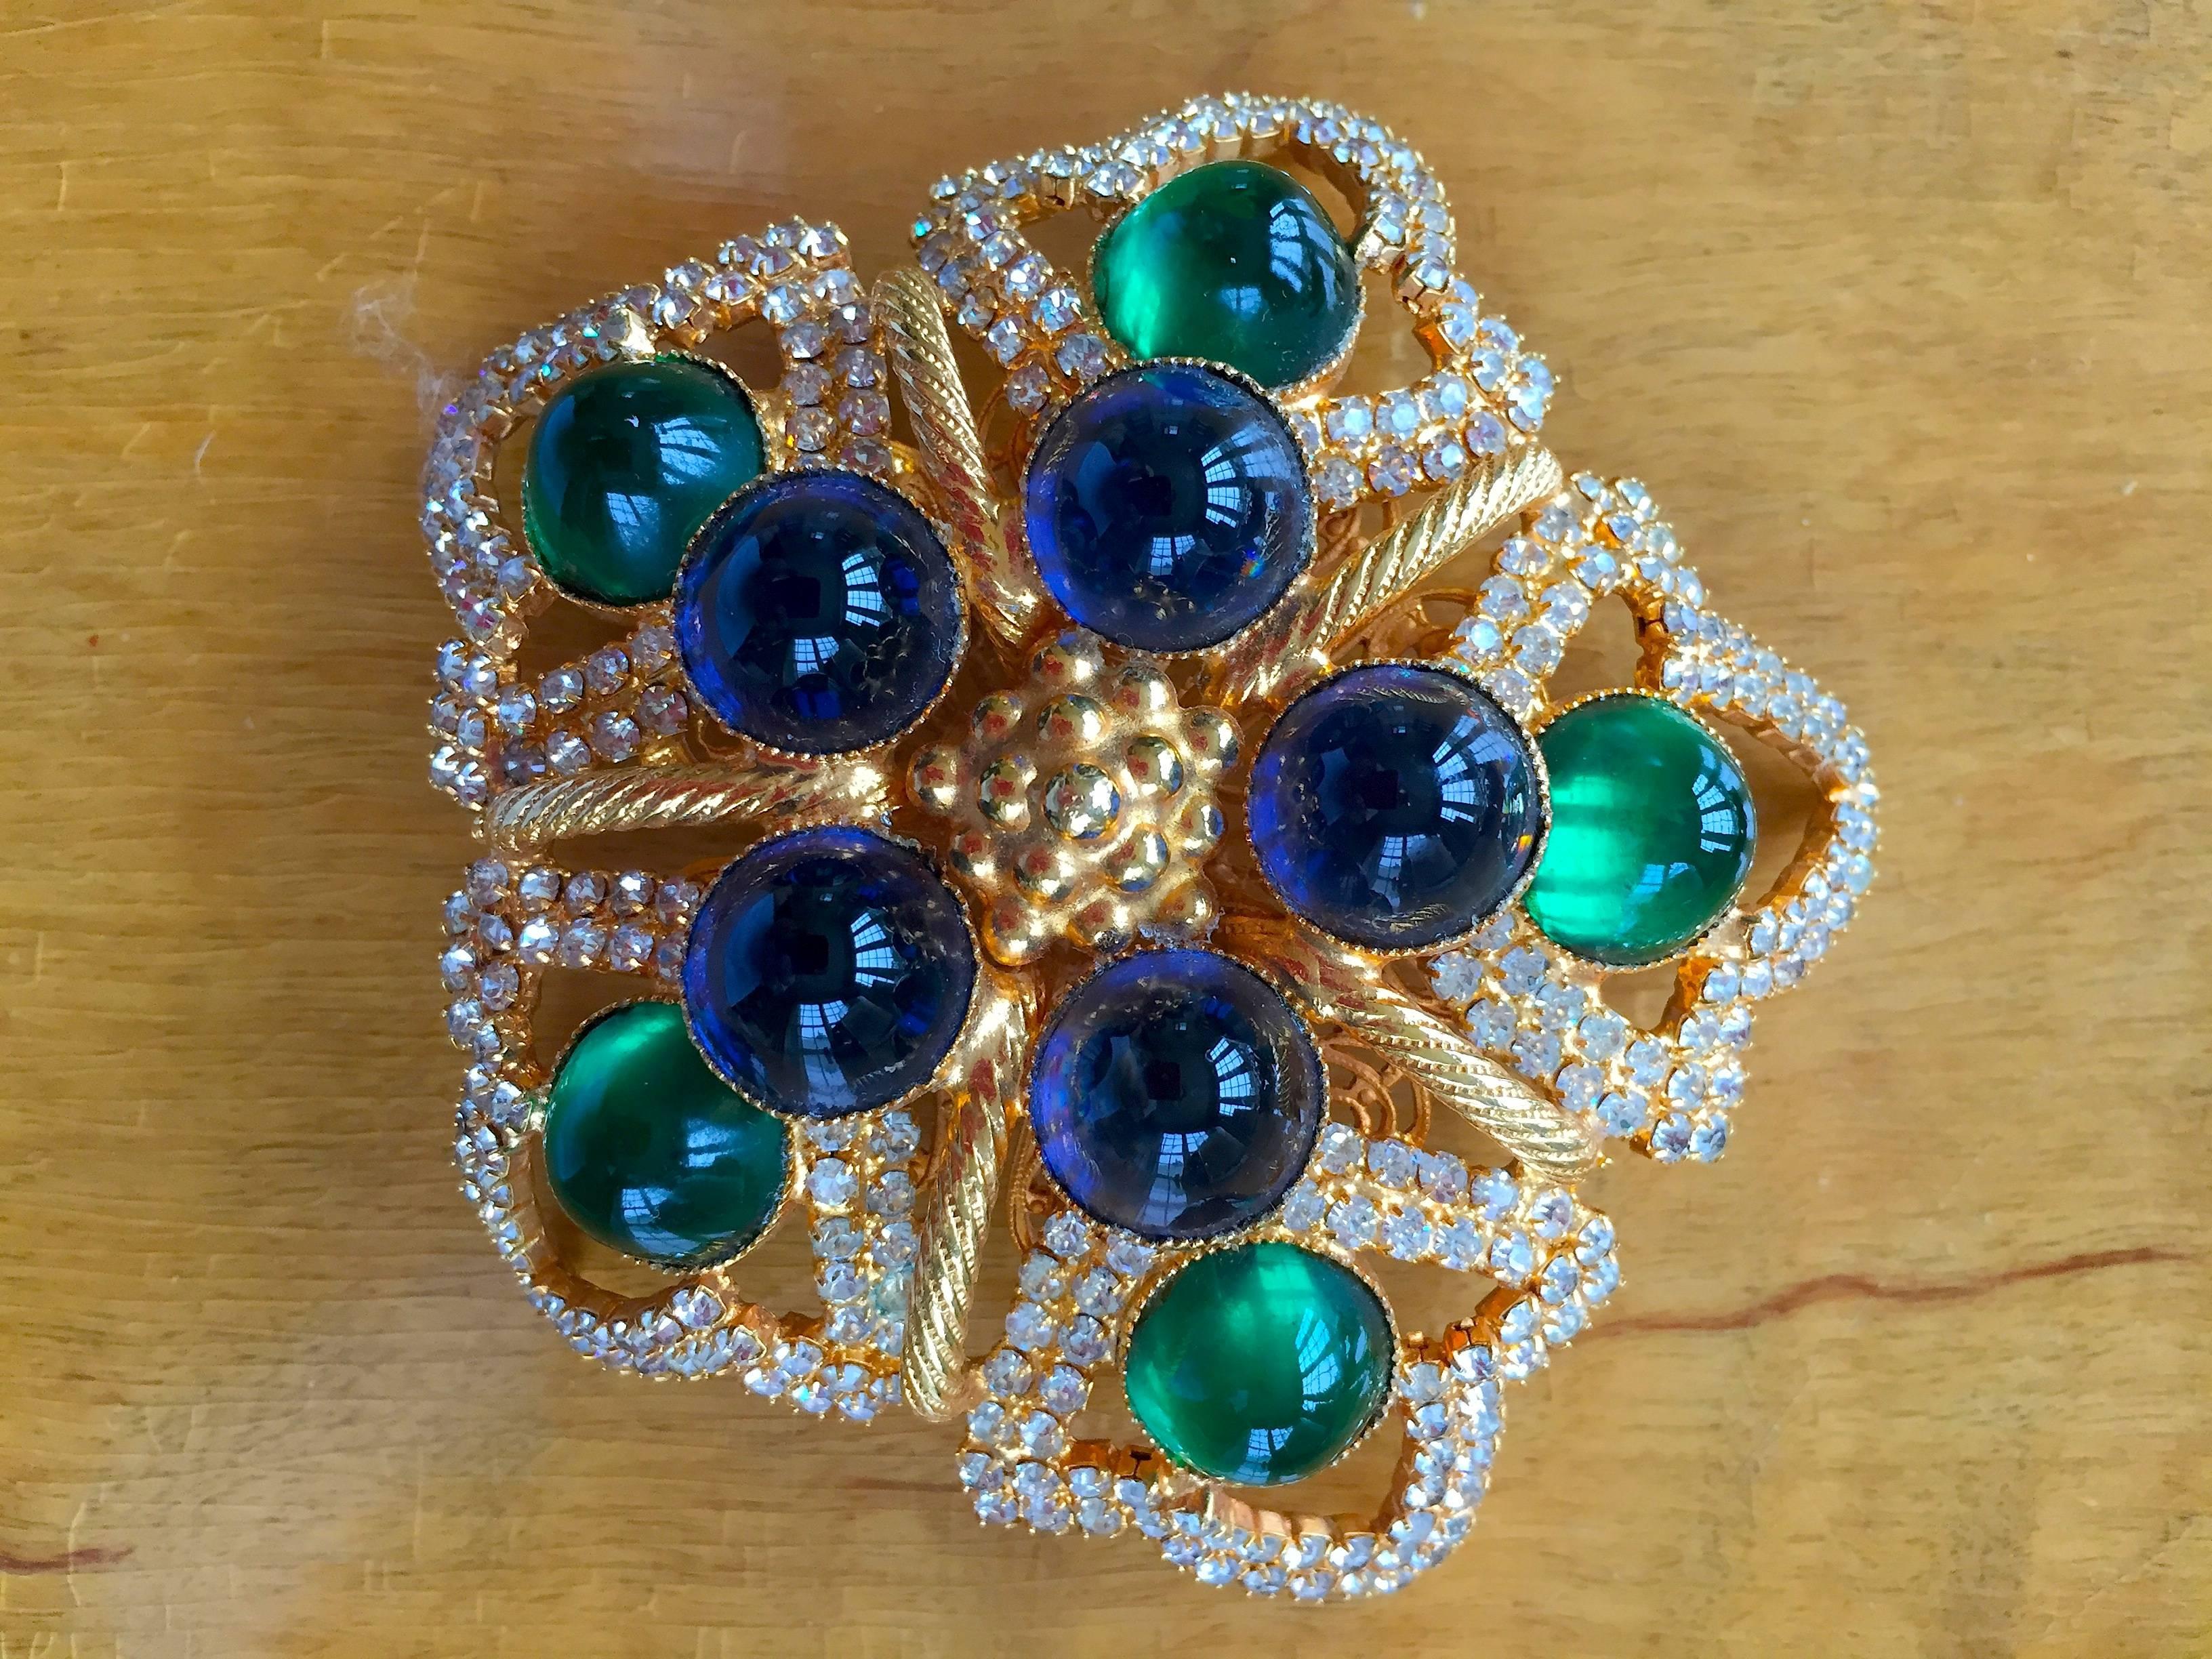 William De Lillo Large Jewel Tone Brooch In Excellent Condition For Sale In Cloverdale, CA